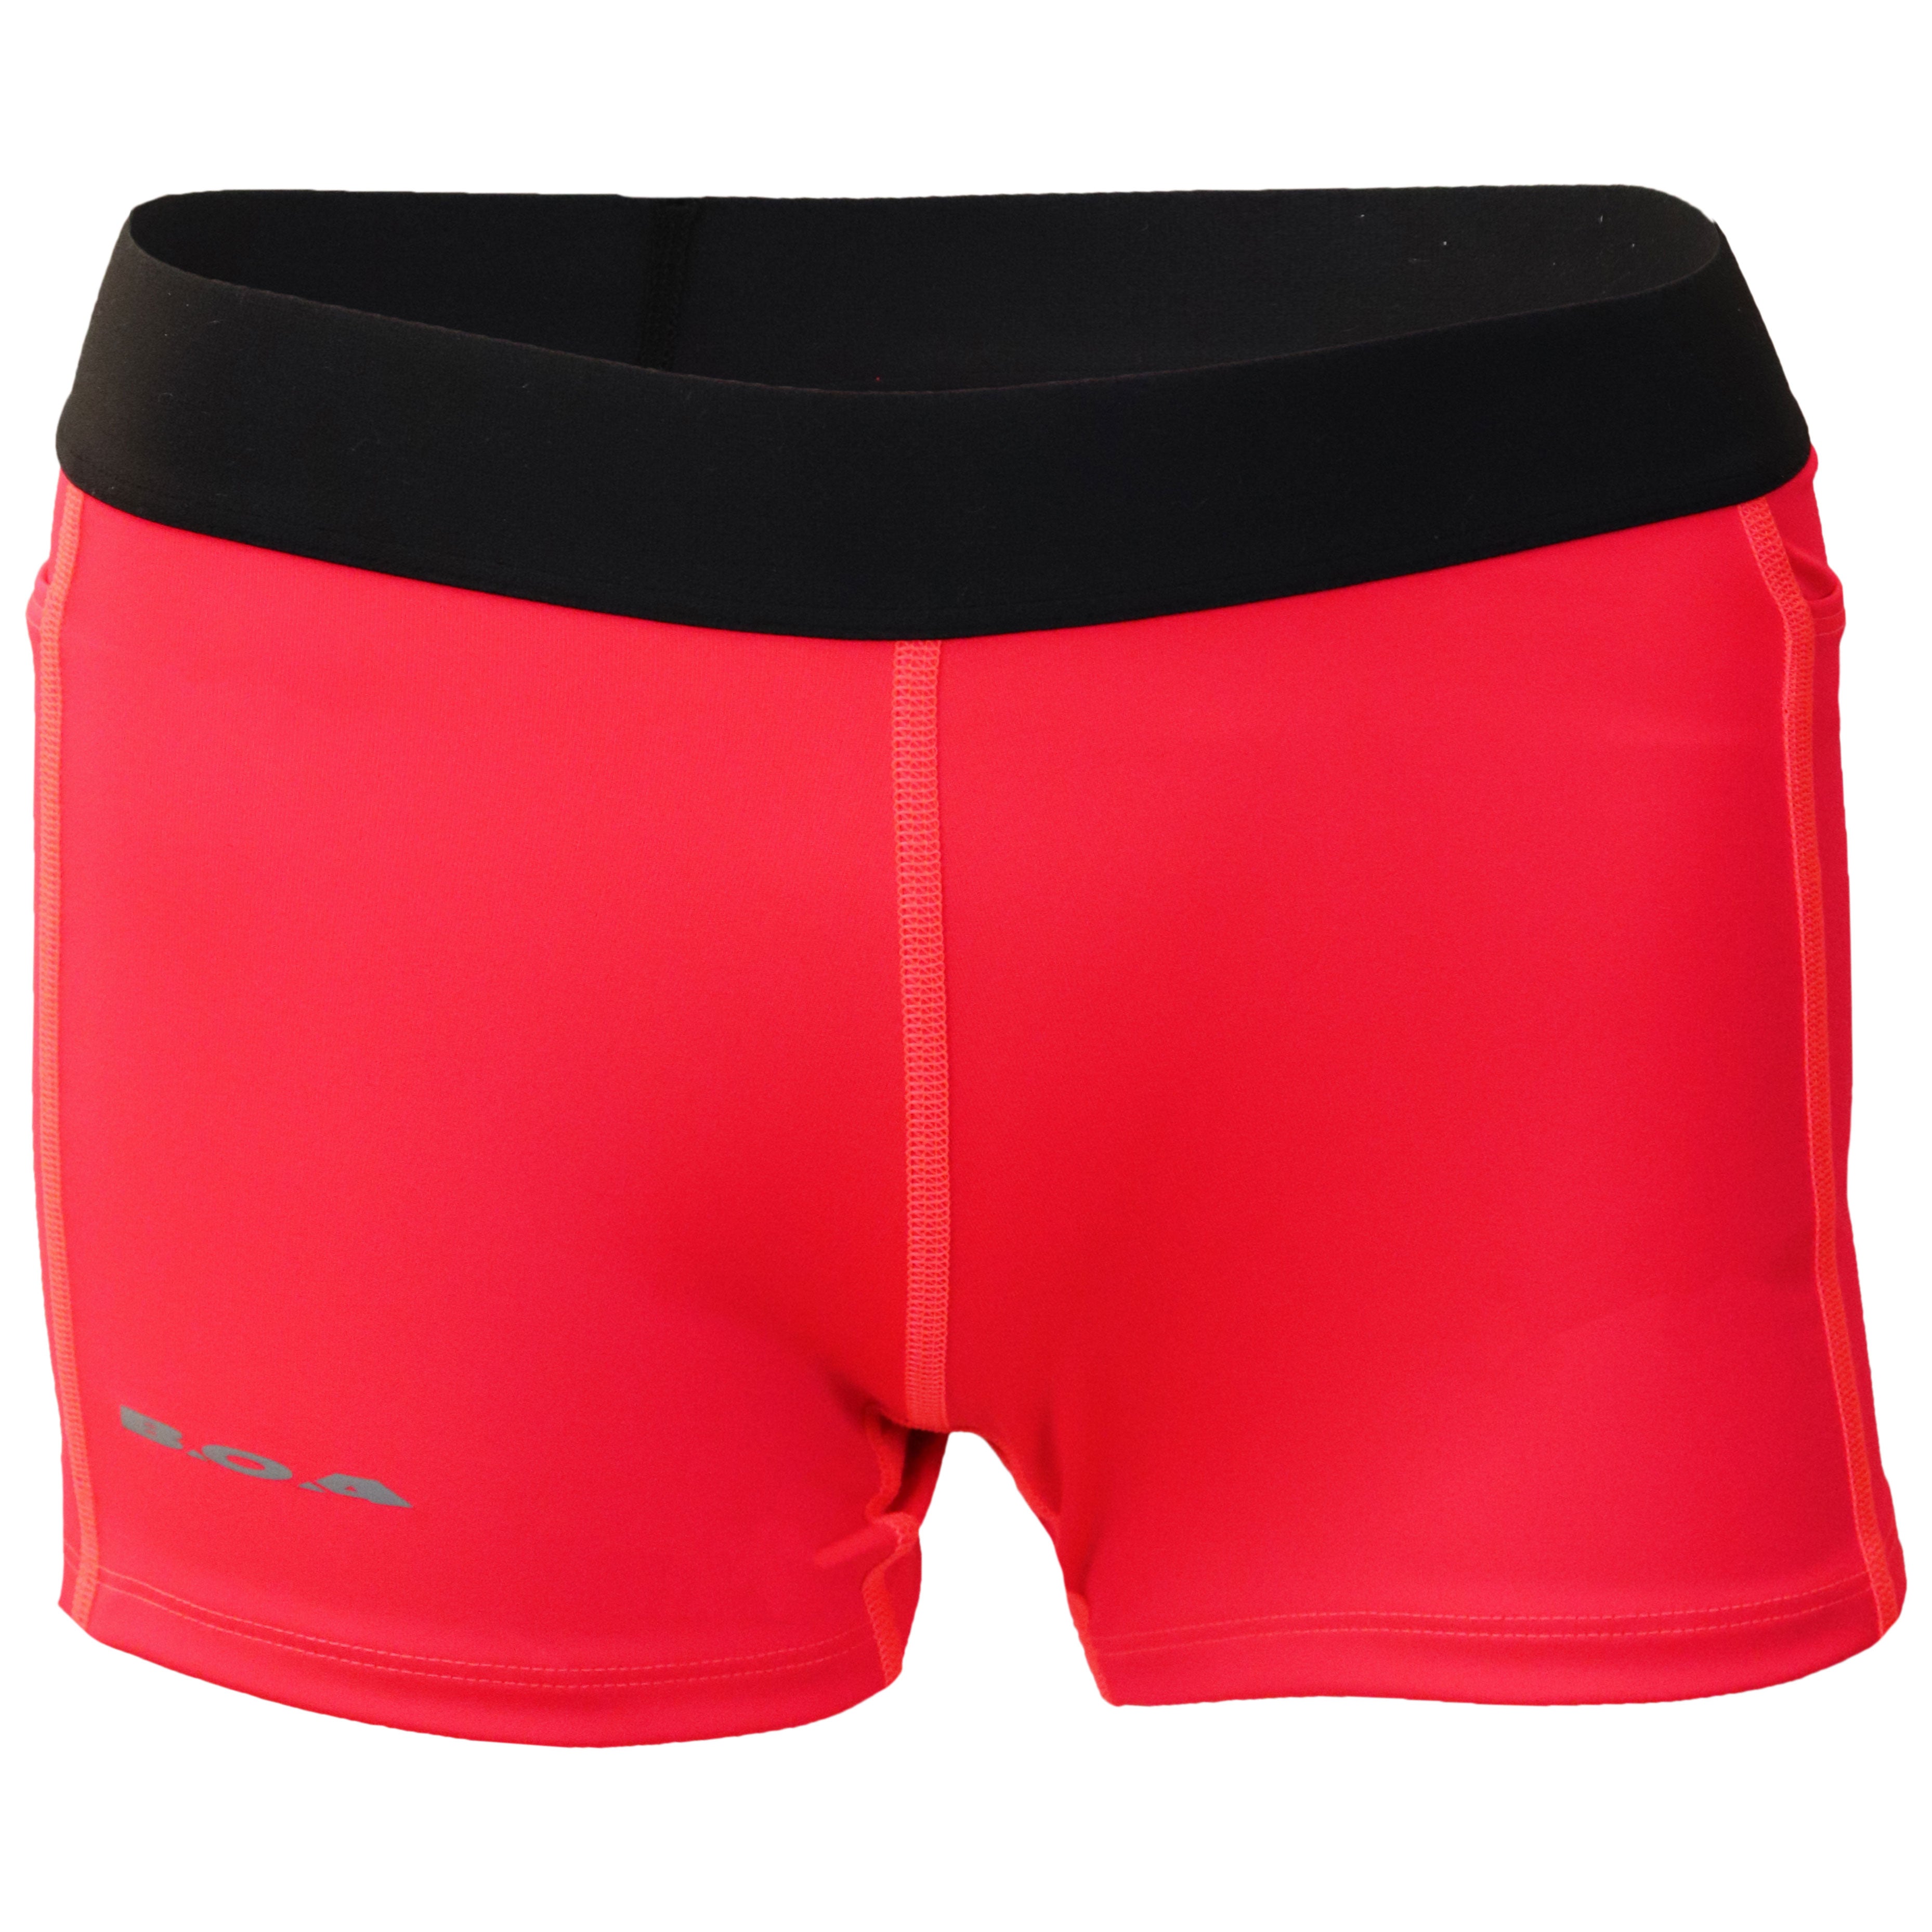 Women's Neon Coral Rocket Fuel Fit Shorts With Pockets – BOA